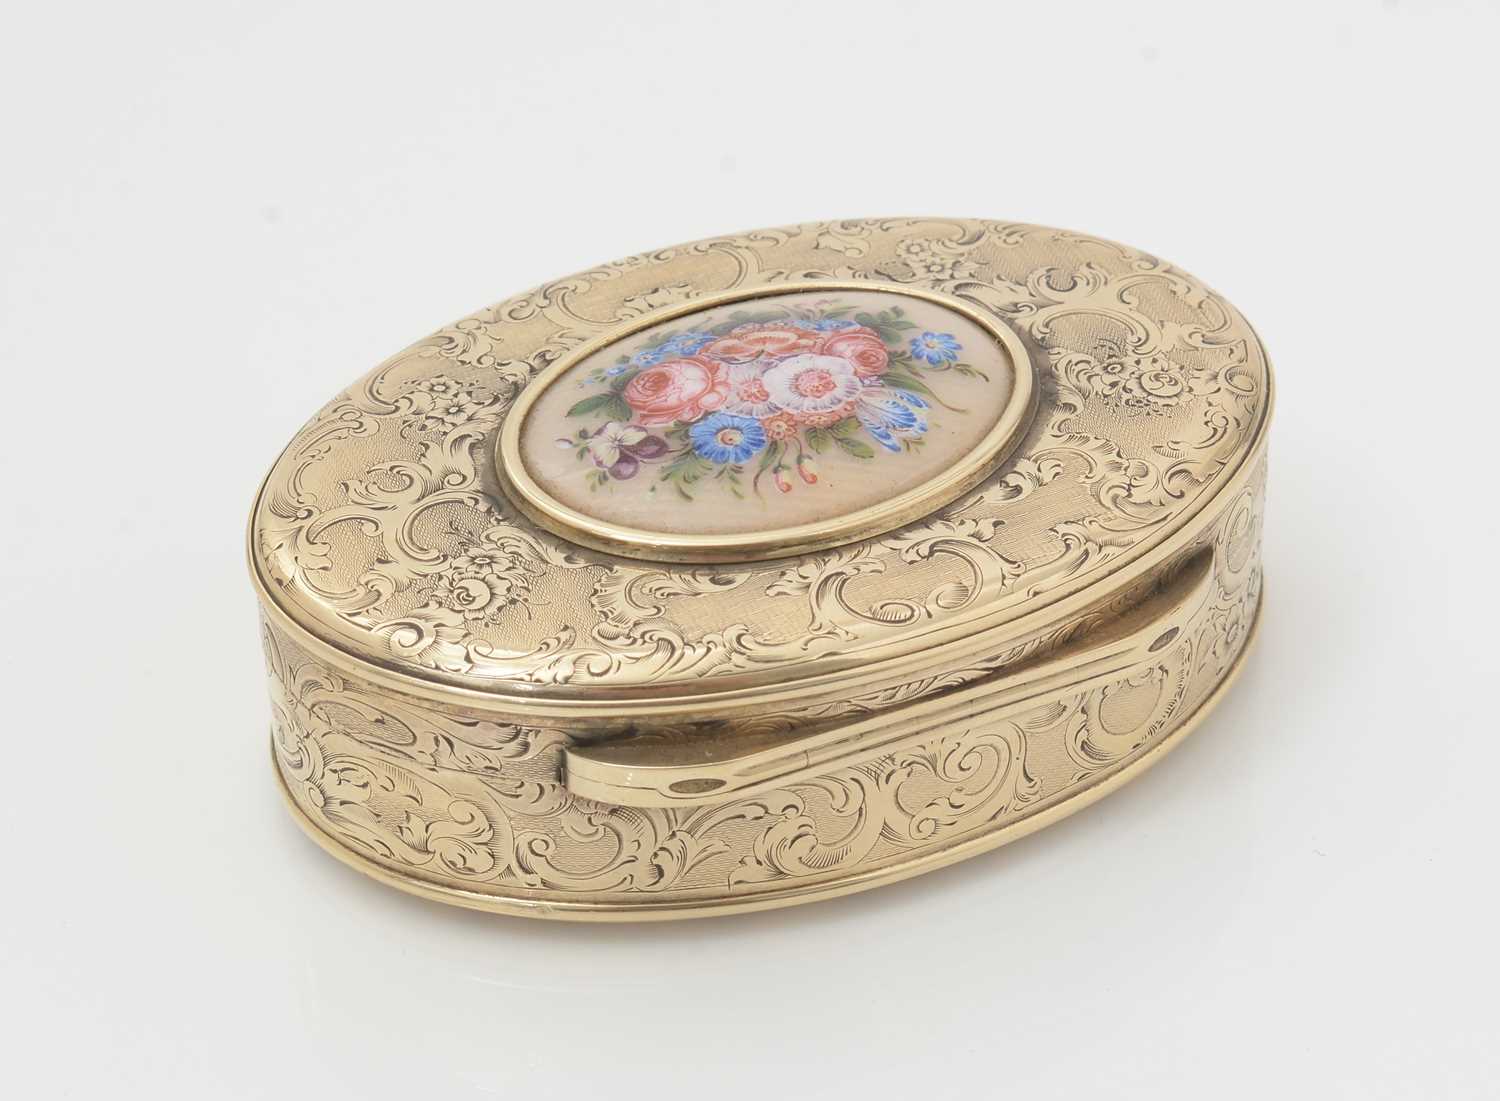 A mid 19th Century Continental silver-gilt snuff box. - Image 2 of 5